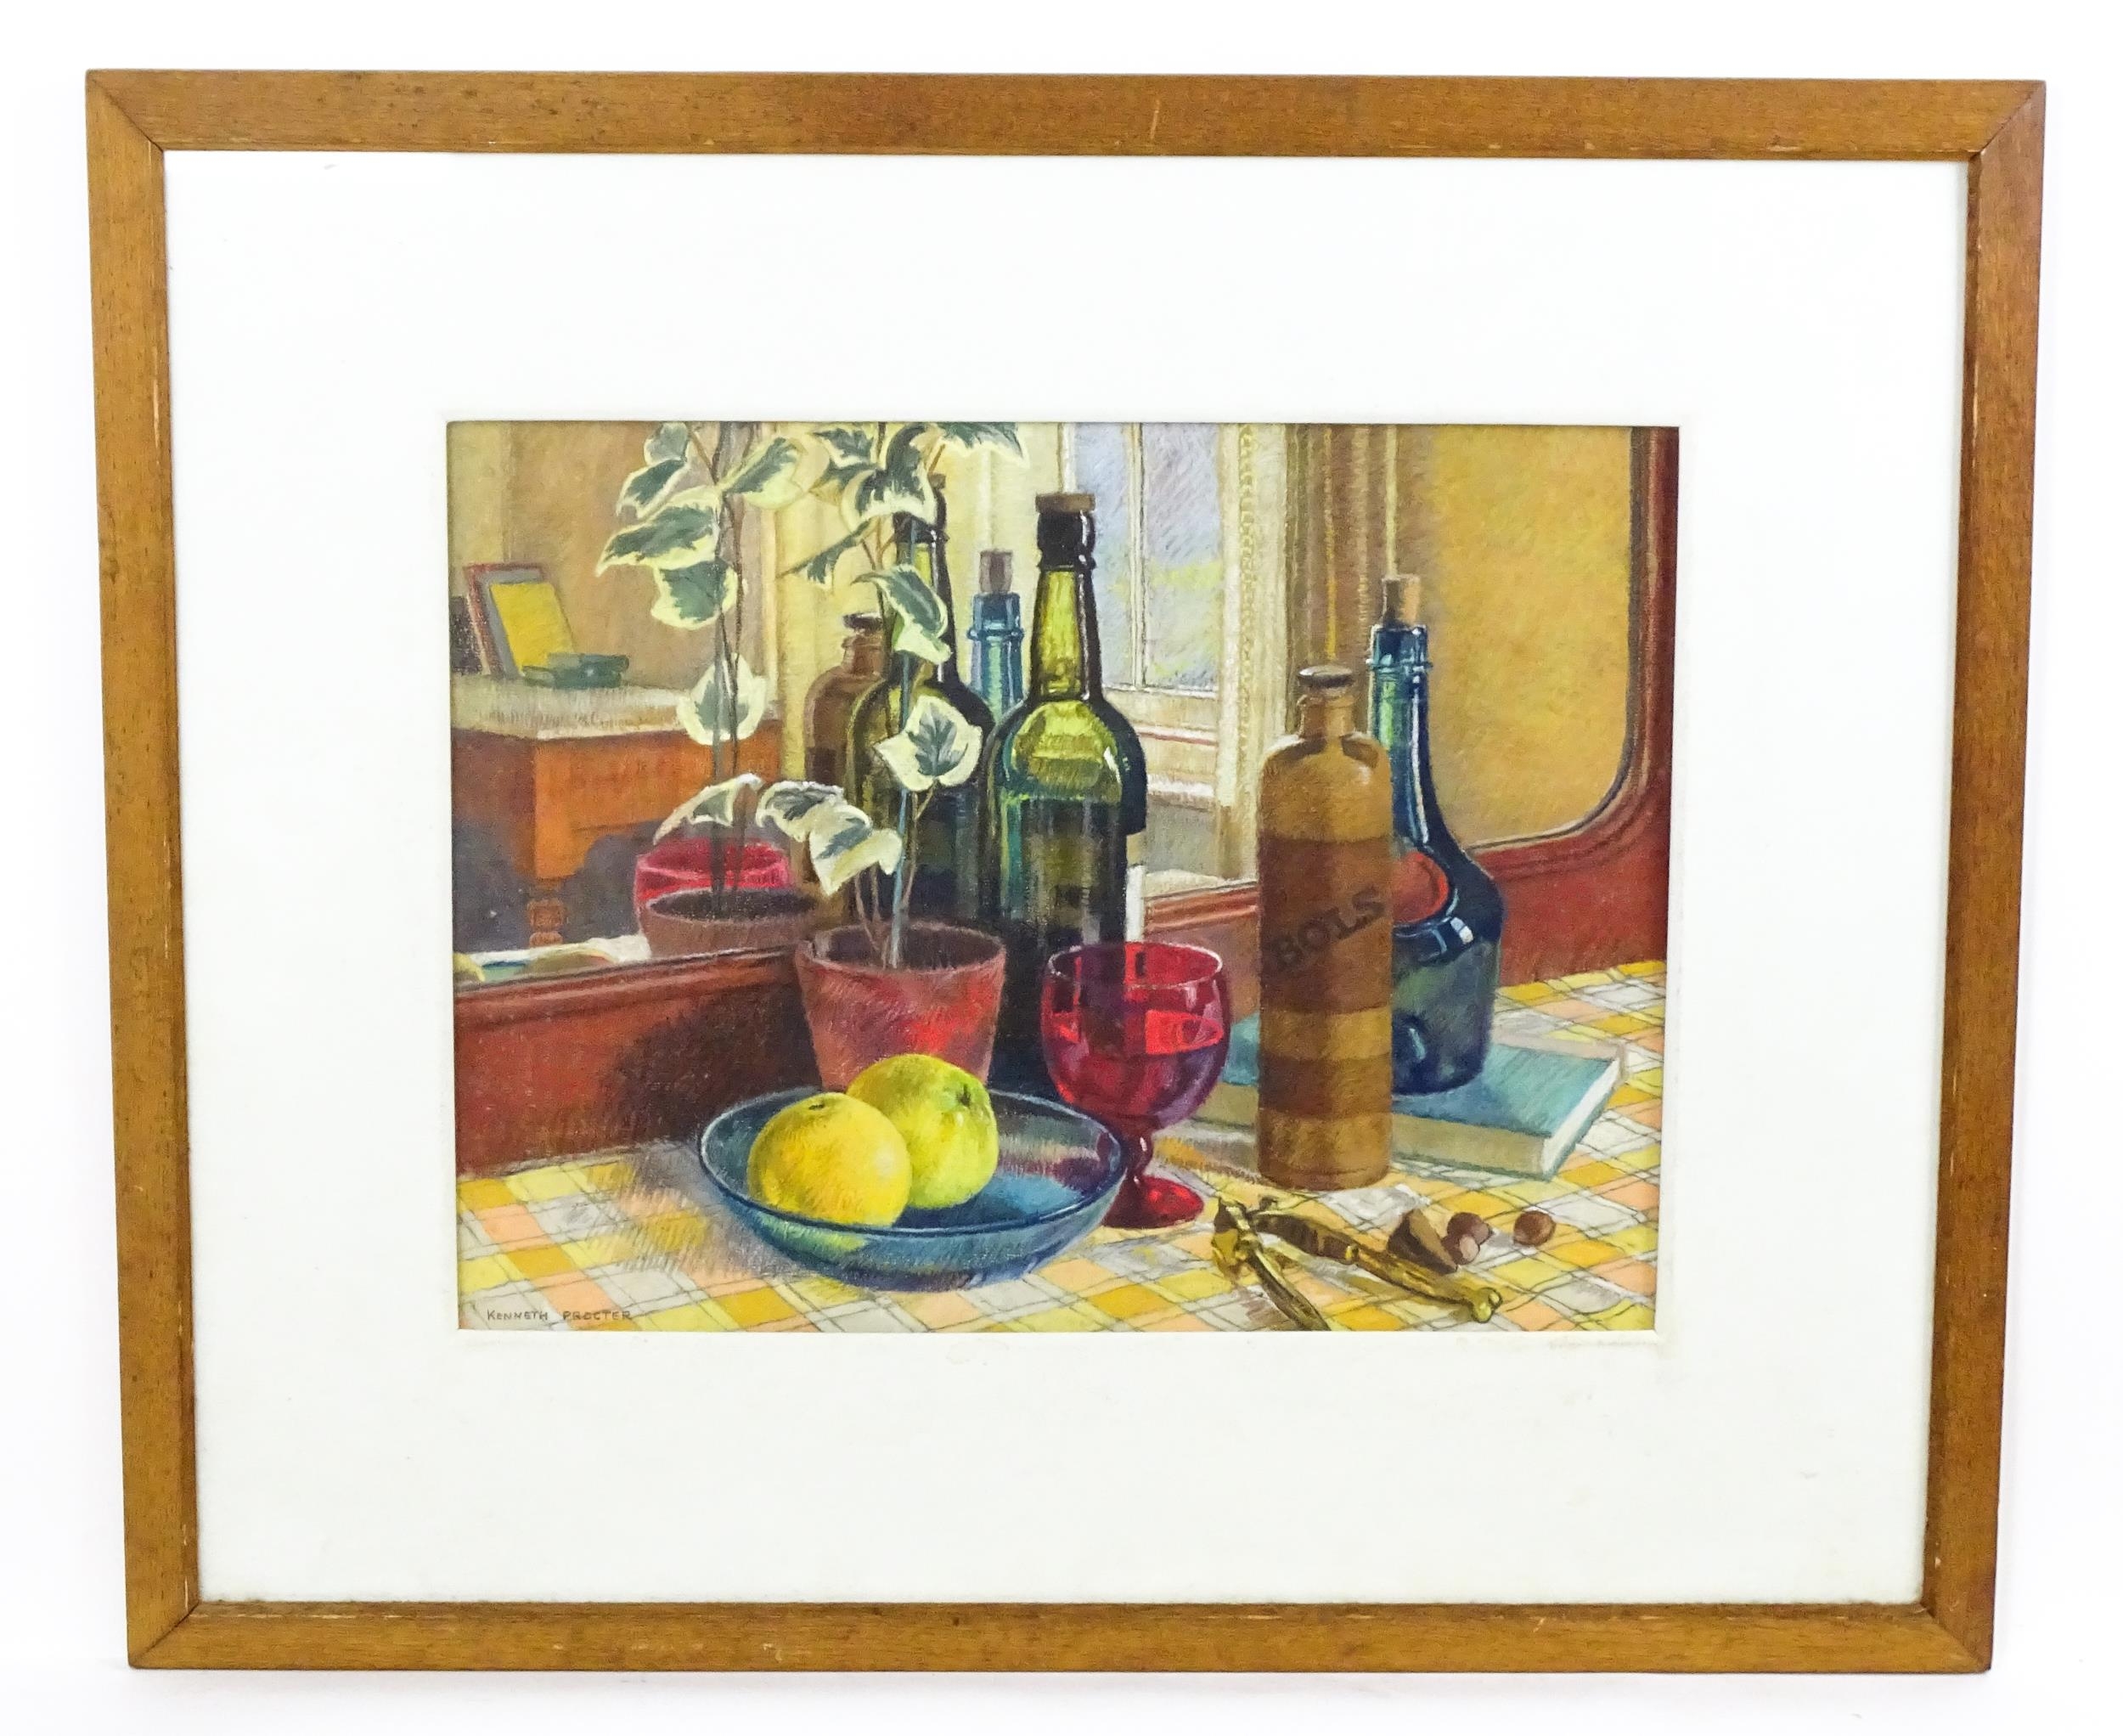 Kenneth Procter (1909-1999), Pastel, A still life study with a plant, bottles, nutcrackers, and a